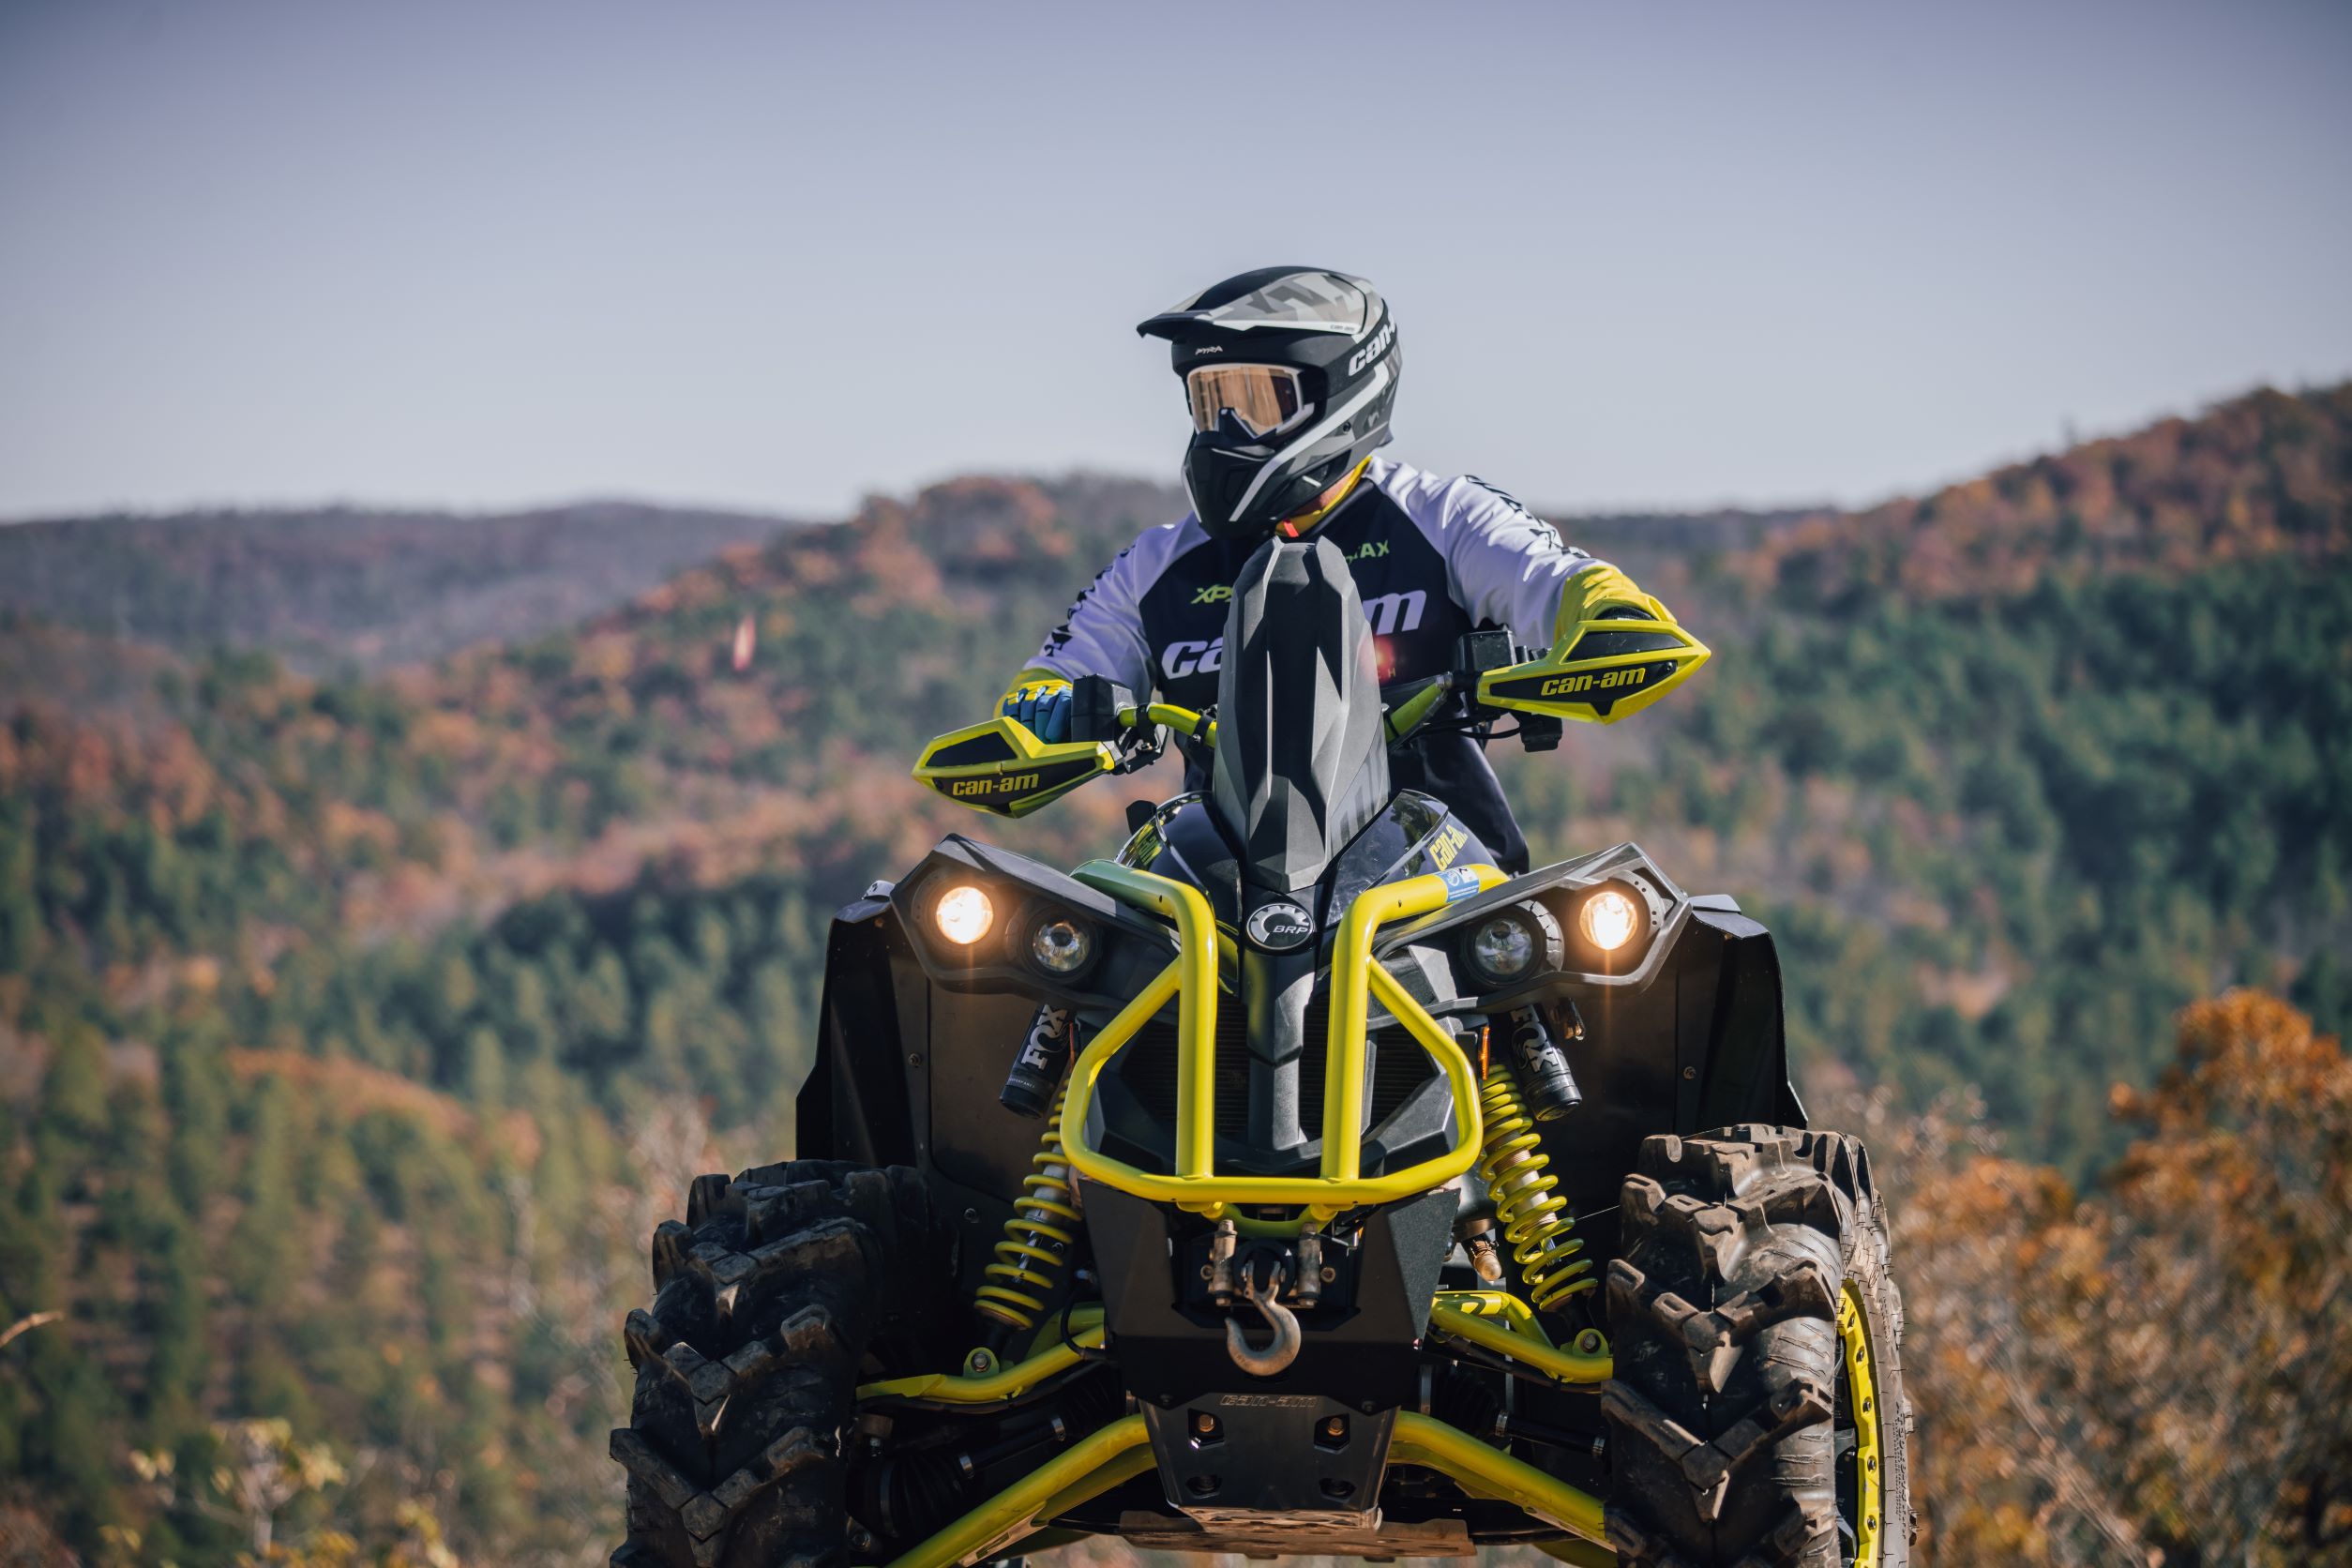 Front view of a Can-Am rider sitting on his parked Renegade enjoying a mountainous view.